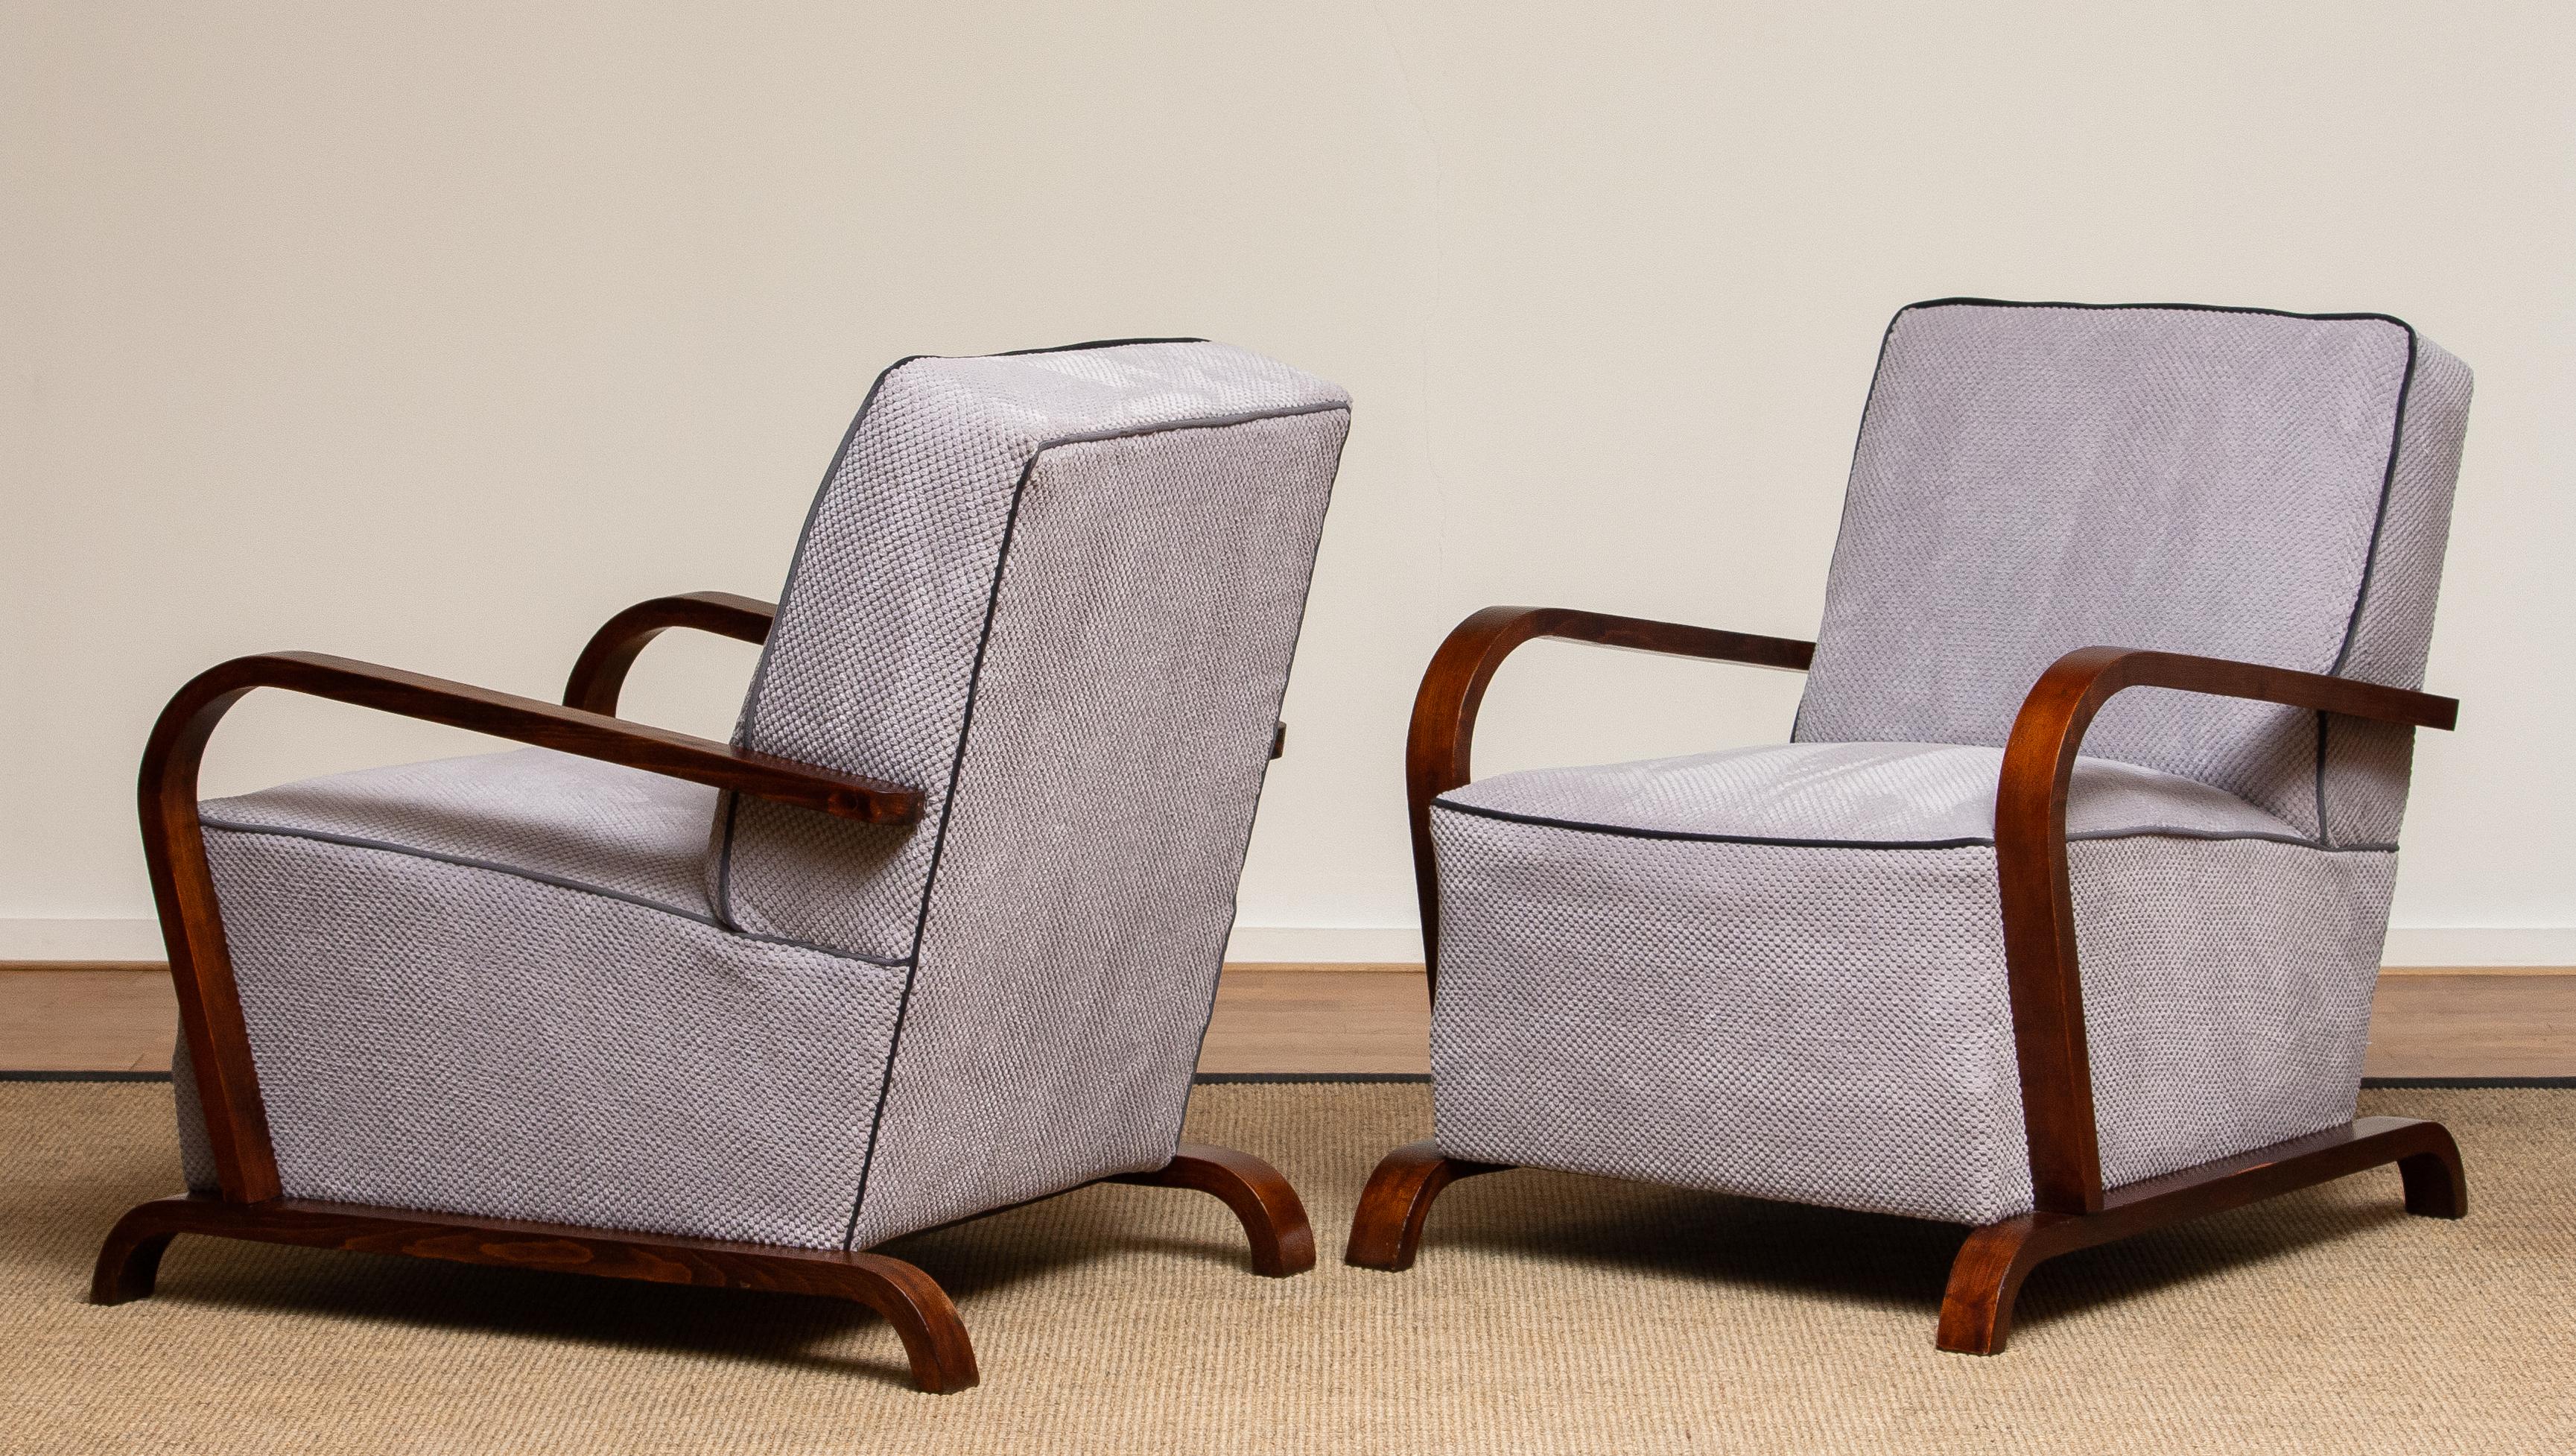 1920s, Pair of Scandinavian Art Deco Armchair / Lounge / Club Chairs from Sweden 2